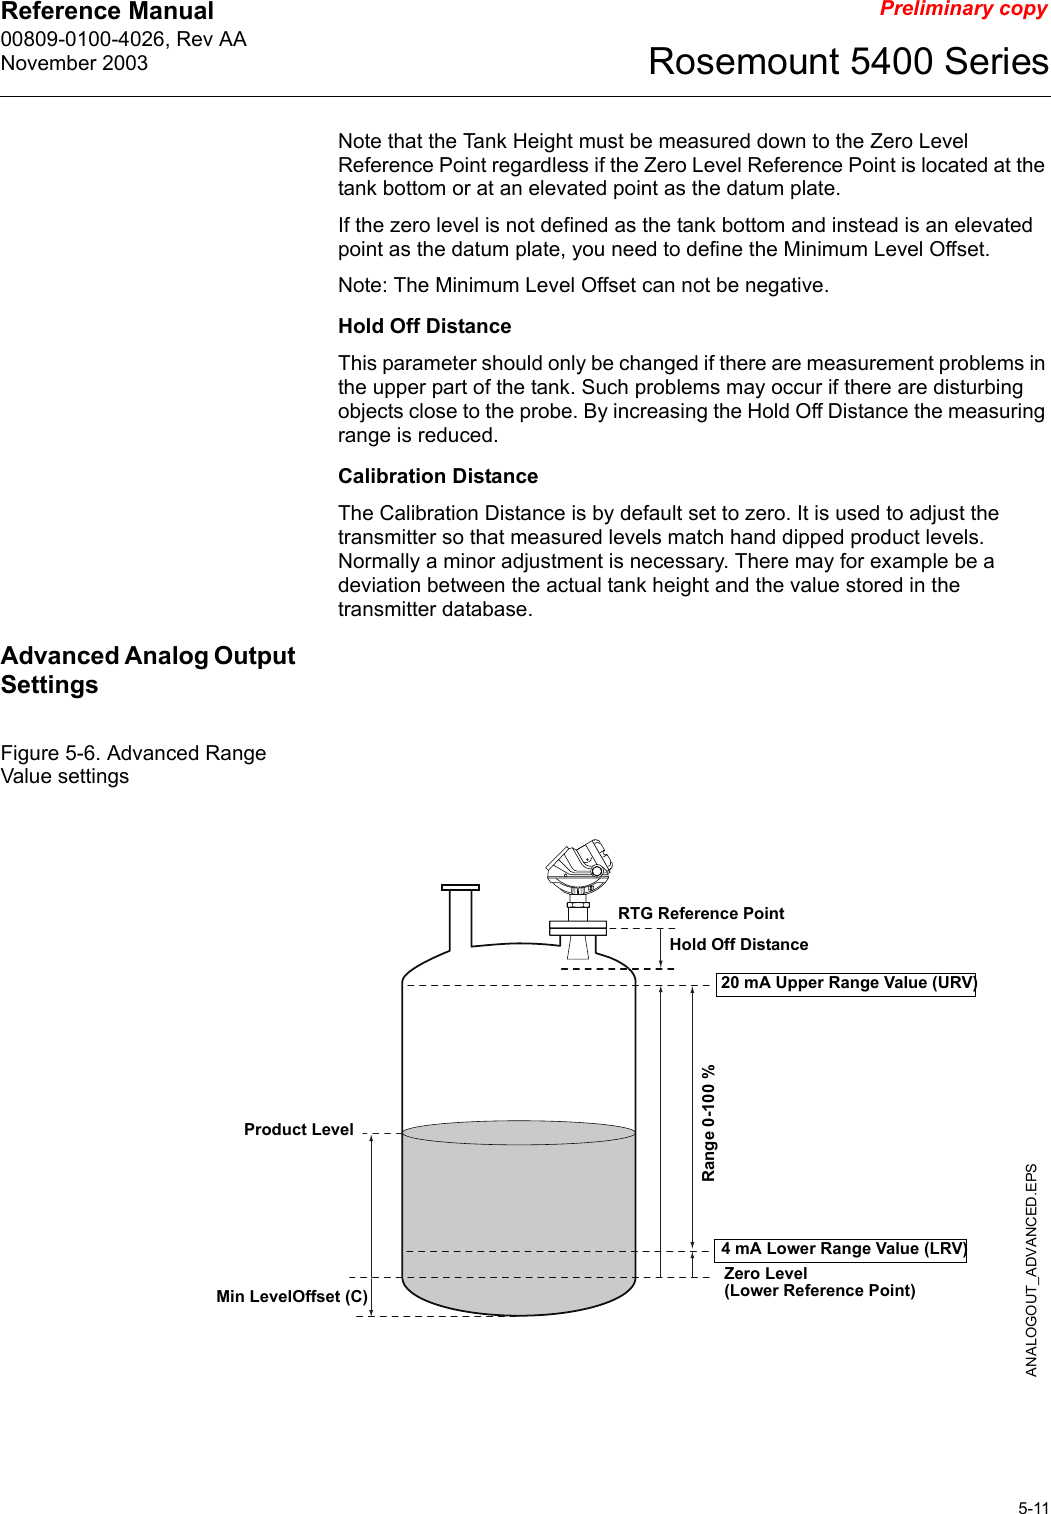 Reference Manual 00809-0100-4026, Rev AANovember 20035-11Rosemount 5400 SeriesPreliminary copyNote that the Tank Height must be measured down to the Zero Level Reference Point regardless if the Zero Level Reference Point is located at the tank bottom or at an elevated point as the datum plate.If the zero level is not defined as the tank bottom and instead is an elevated point as the datum plate, you need to define the Minimum Level Offset.Note: The Minimum Level Offset can not be negative.Hold Off DistanceThis parameter should only be changed if there are measurement problems in the upper part of the tank. Such problems may occur if there are disturbing objects close to the probe. By increasing the Hold Off Distance the measuring range is reduced.Calibration DistanceThe Calibration Distance is by default set to zero. It is used to adjust the transmitter so that measured levels match hand dipped product levels. Normally a minor adjustment is necessary. There may for example be a deviation between the actual tank height and the value stored in the transmitter database.Advanced Analog Output SettingsFigure 5-6. Advanced Range Value settings20 mA Upper Range Value (URV)Product Level4 mA Lower Range Value (LRV)Range 0-100 %ANALOGOUT_ADVANCED.EPSZero Level (Lower Reference Point)RTG Reference PointMin LevelOffset (C)Hold Off Distance